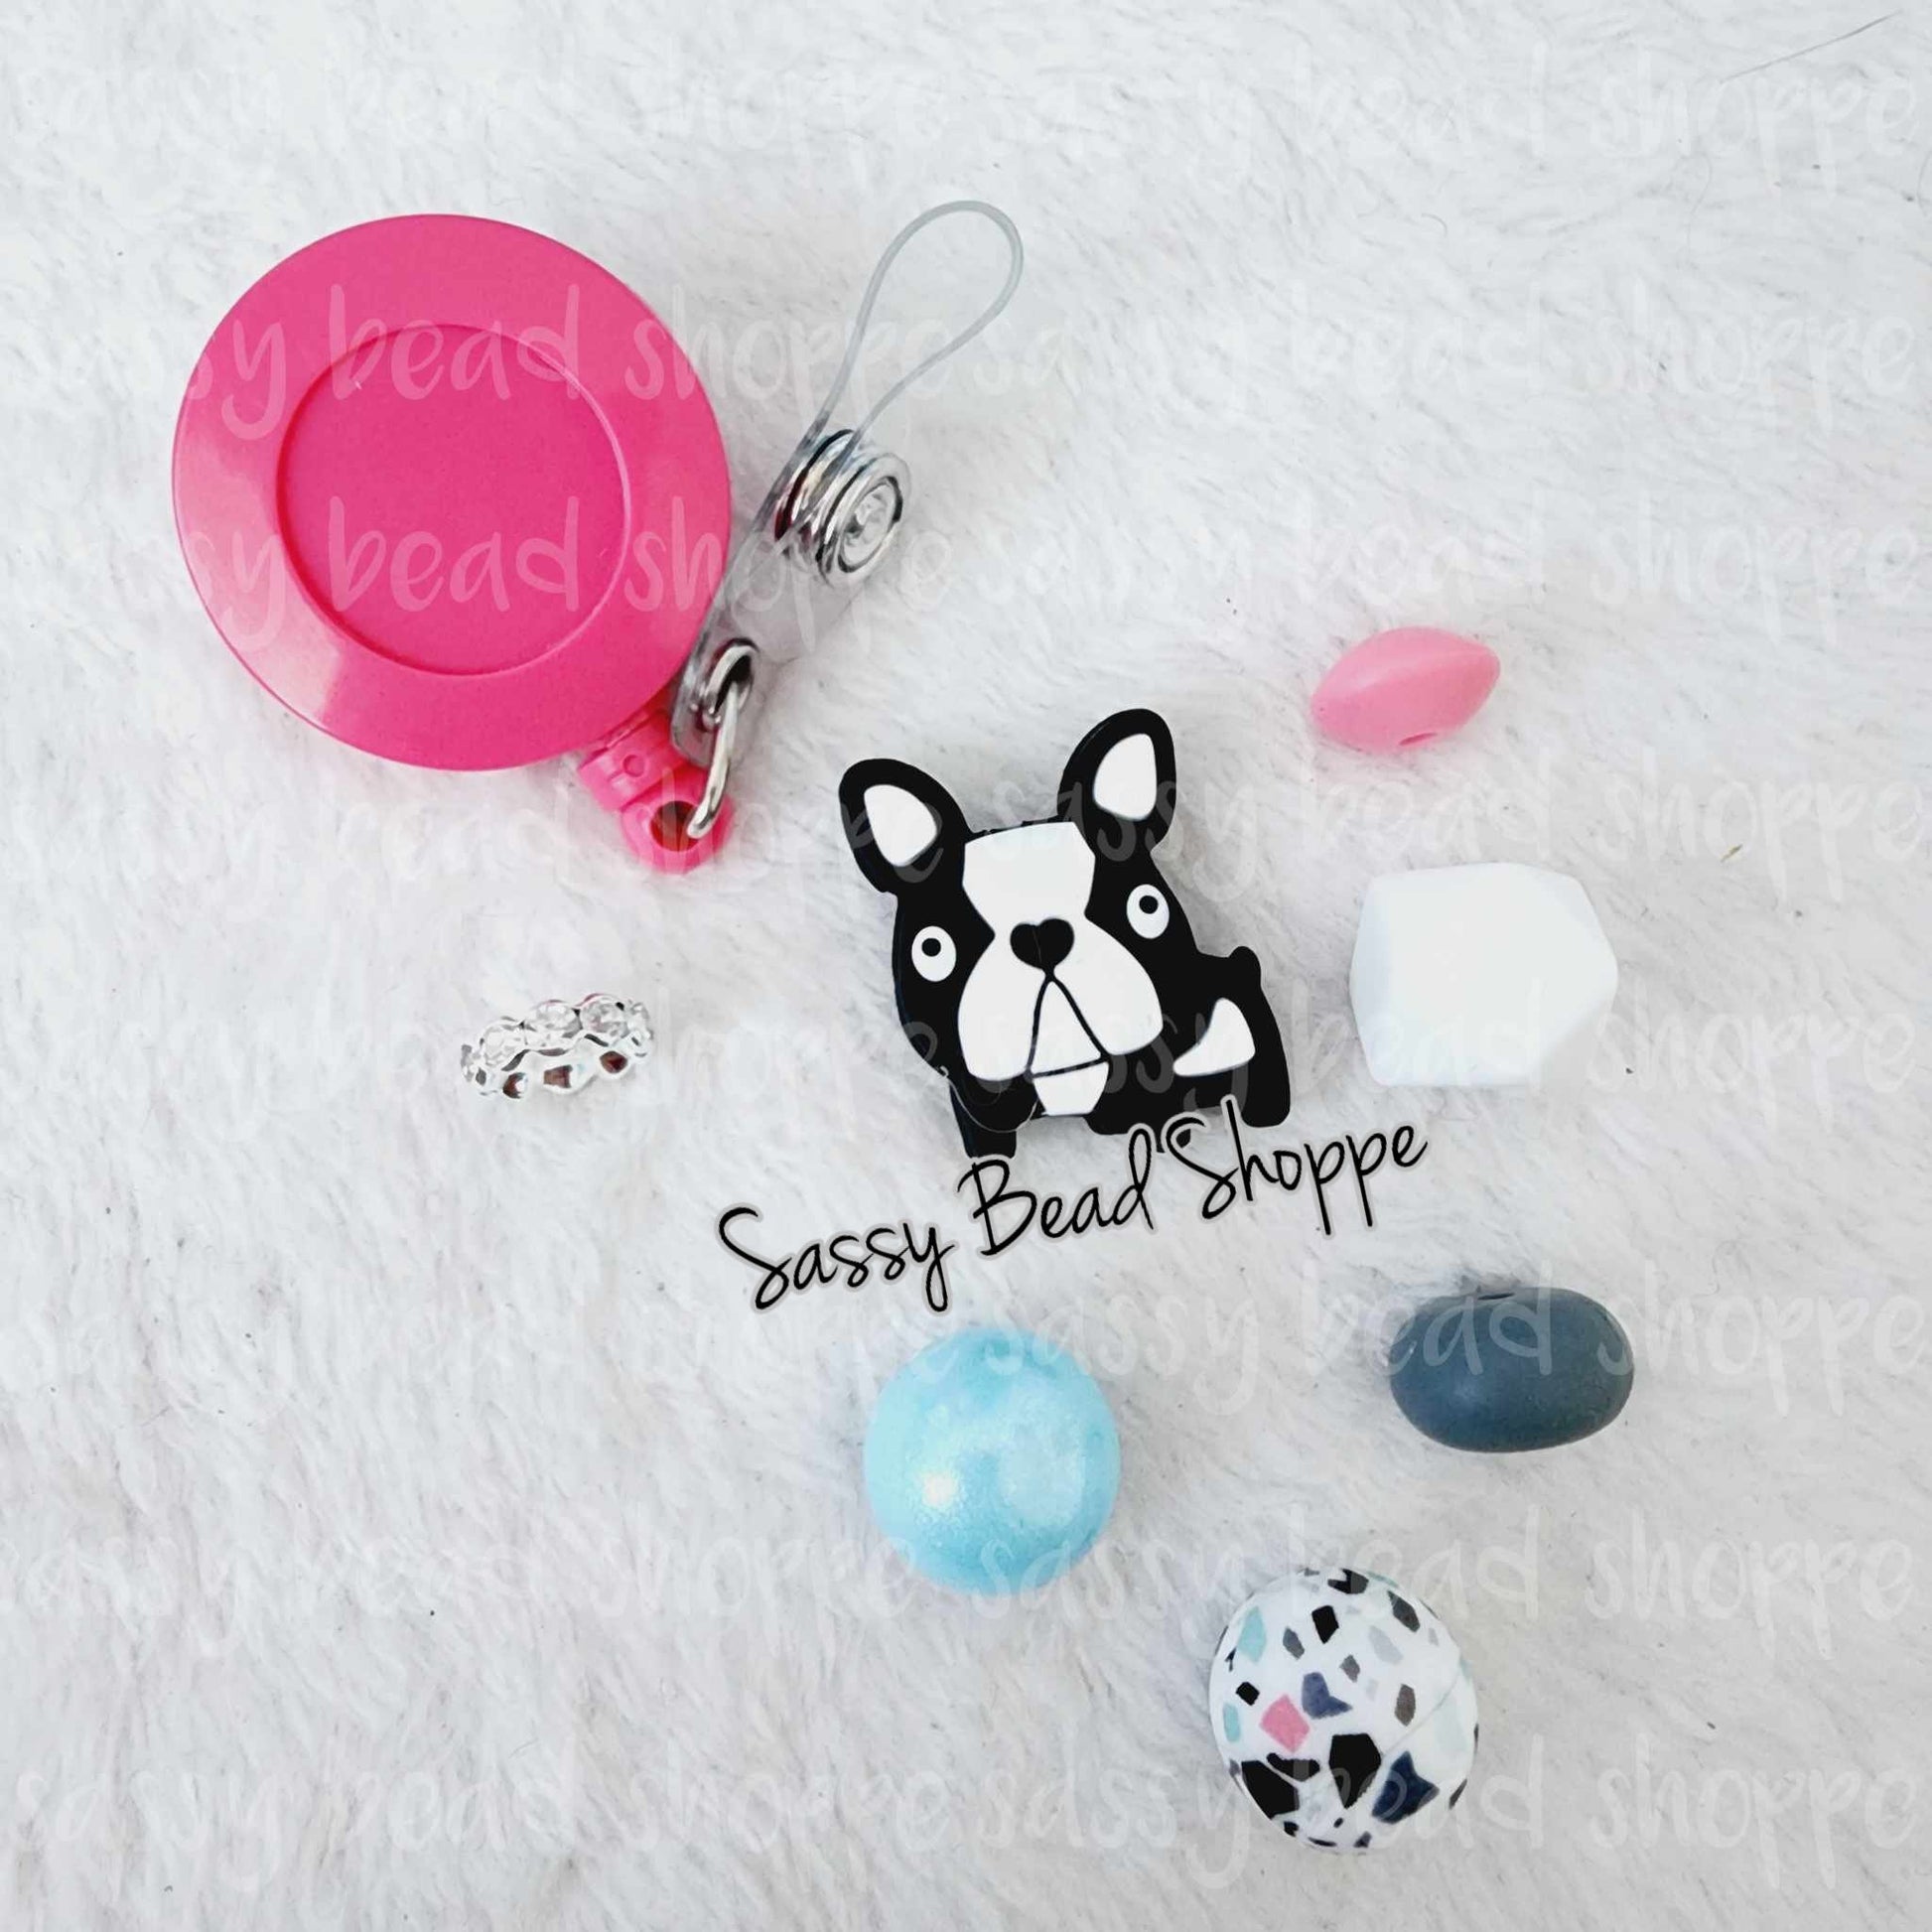 Sassy Bead Shoppe Terrific Terrier Badge Reel What you will receive in your kit